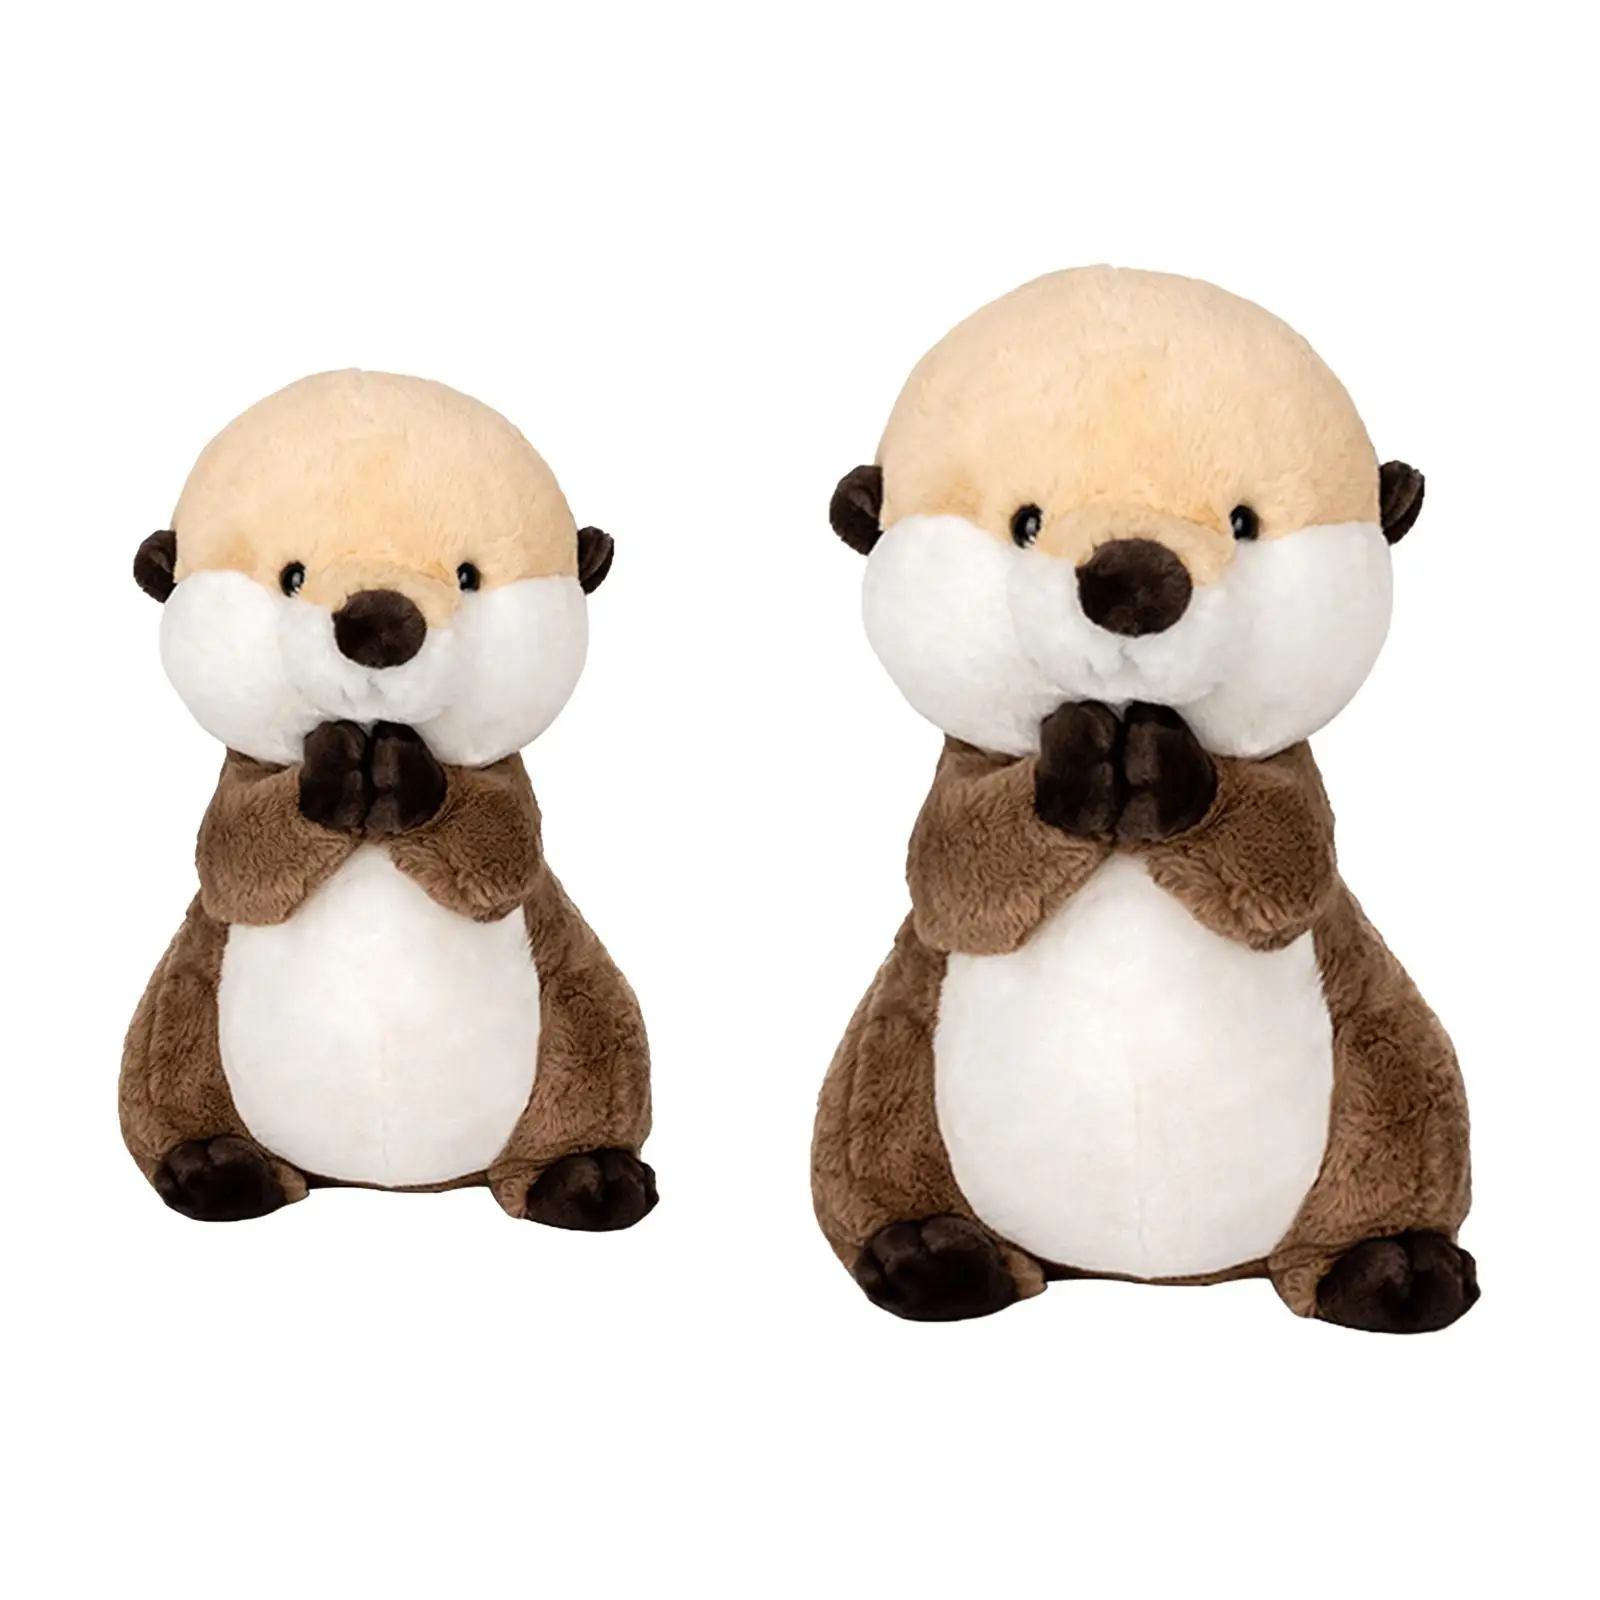 Otter Plush Toys Realistic Photo Props Early Education Toy Plush Stuffed Animal Otter Toys for Home Decor Kids Birthday Gifts